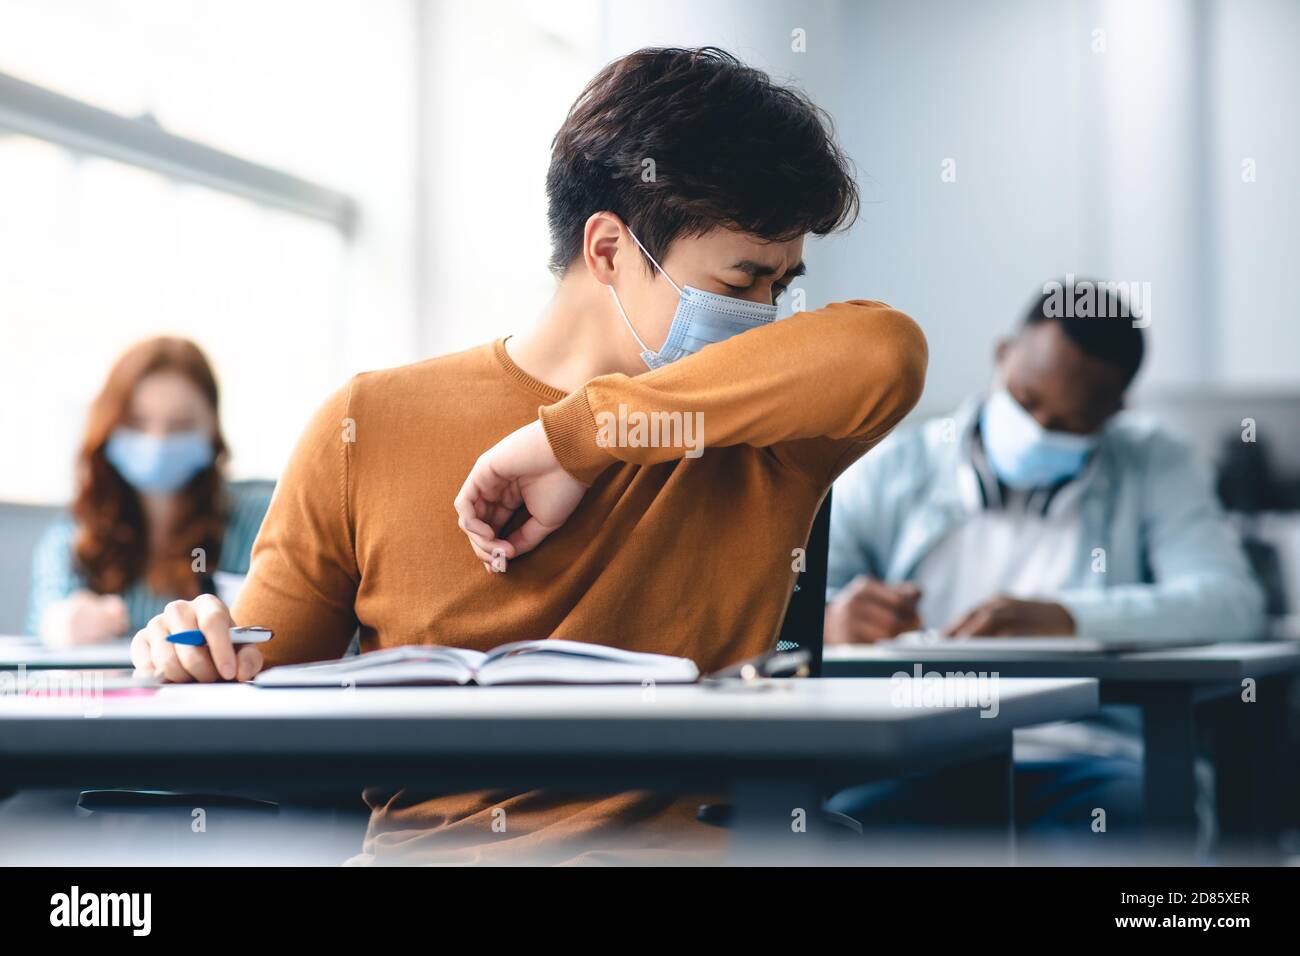 Asian male student couching in his elbow, sneezing in sleeve Stock Photo